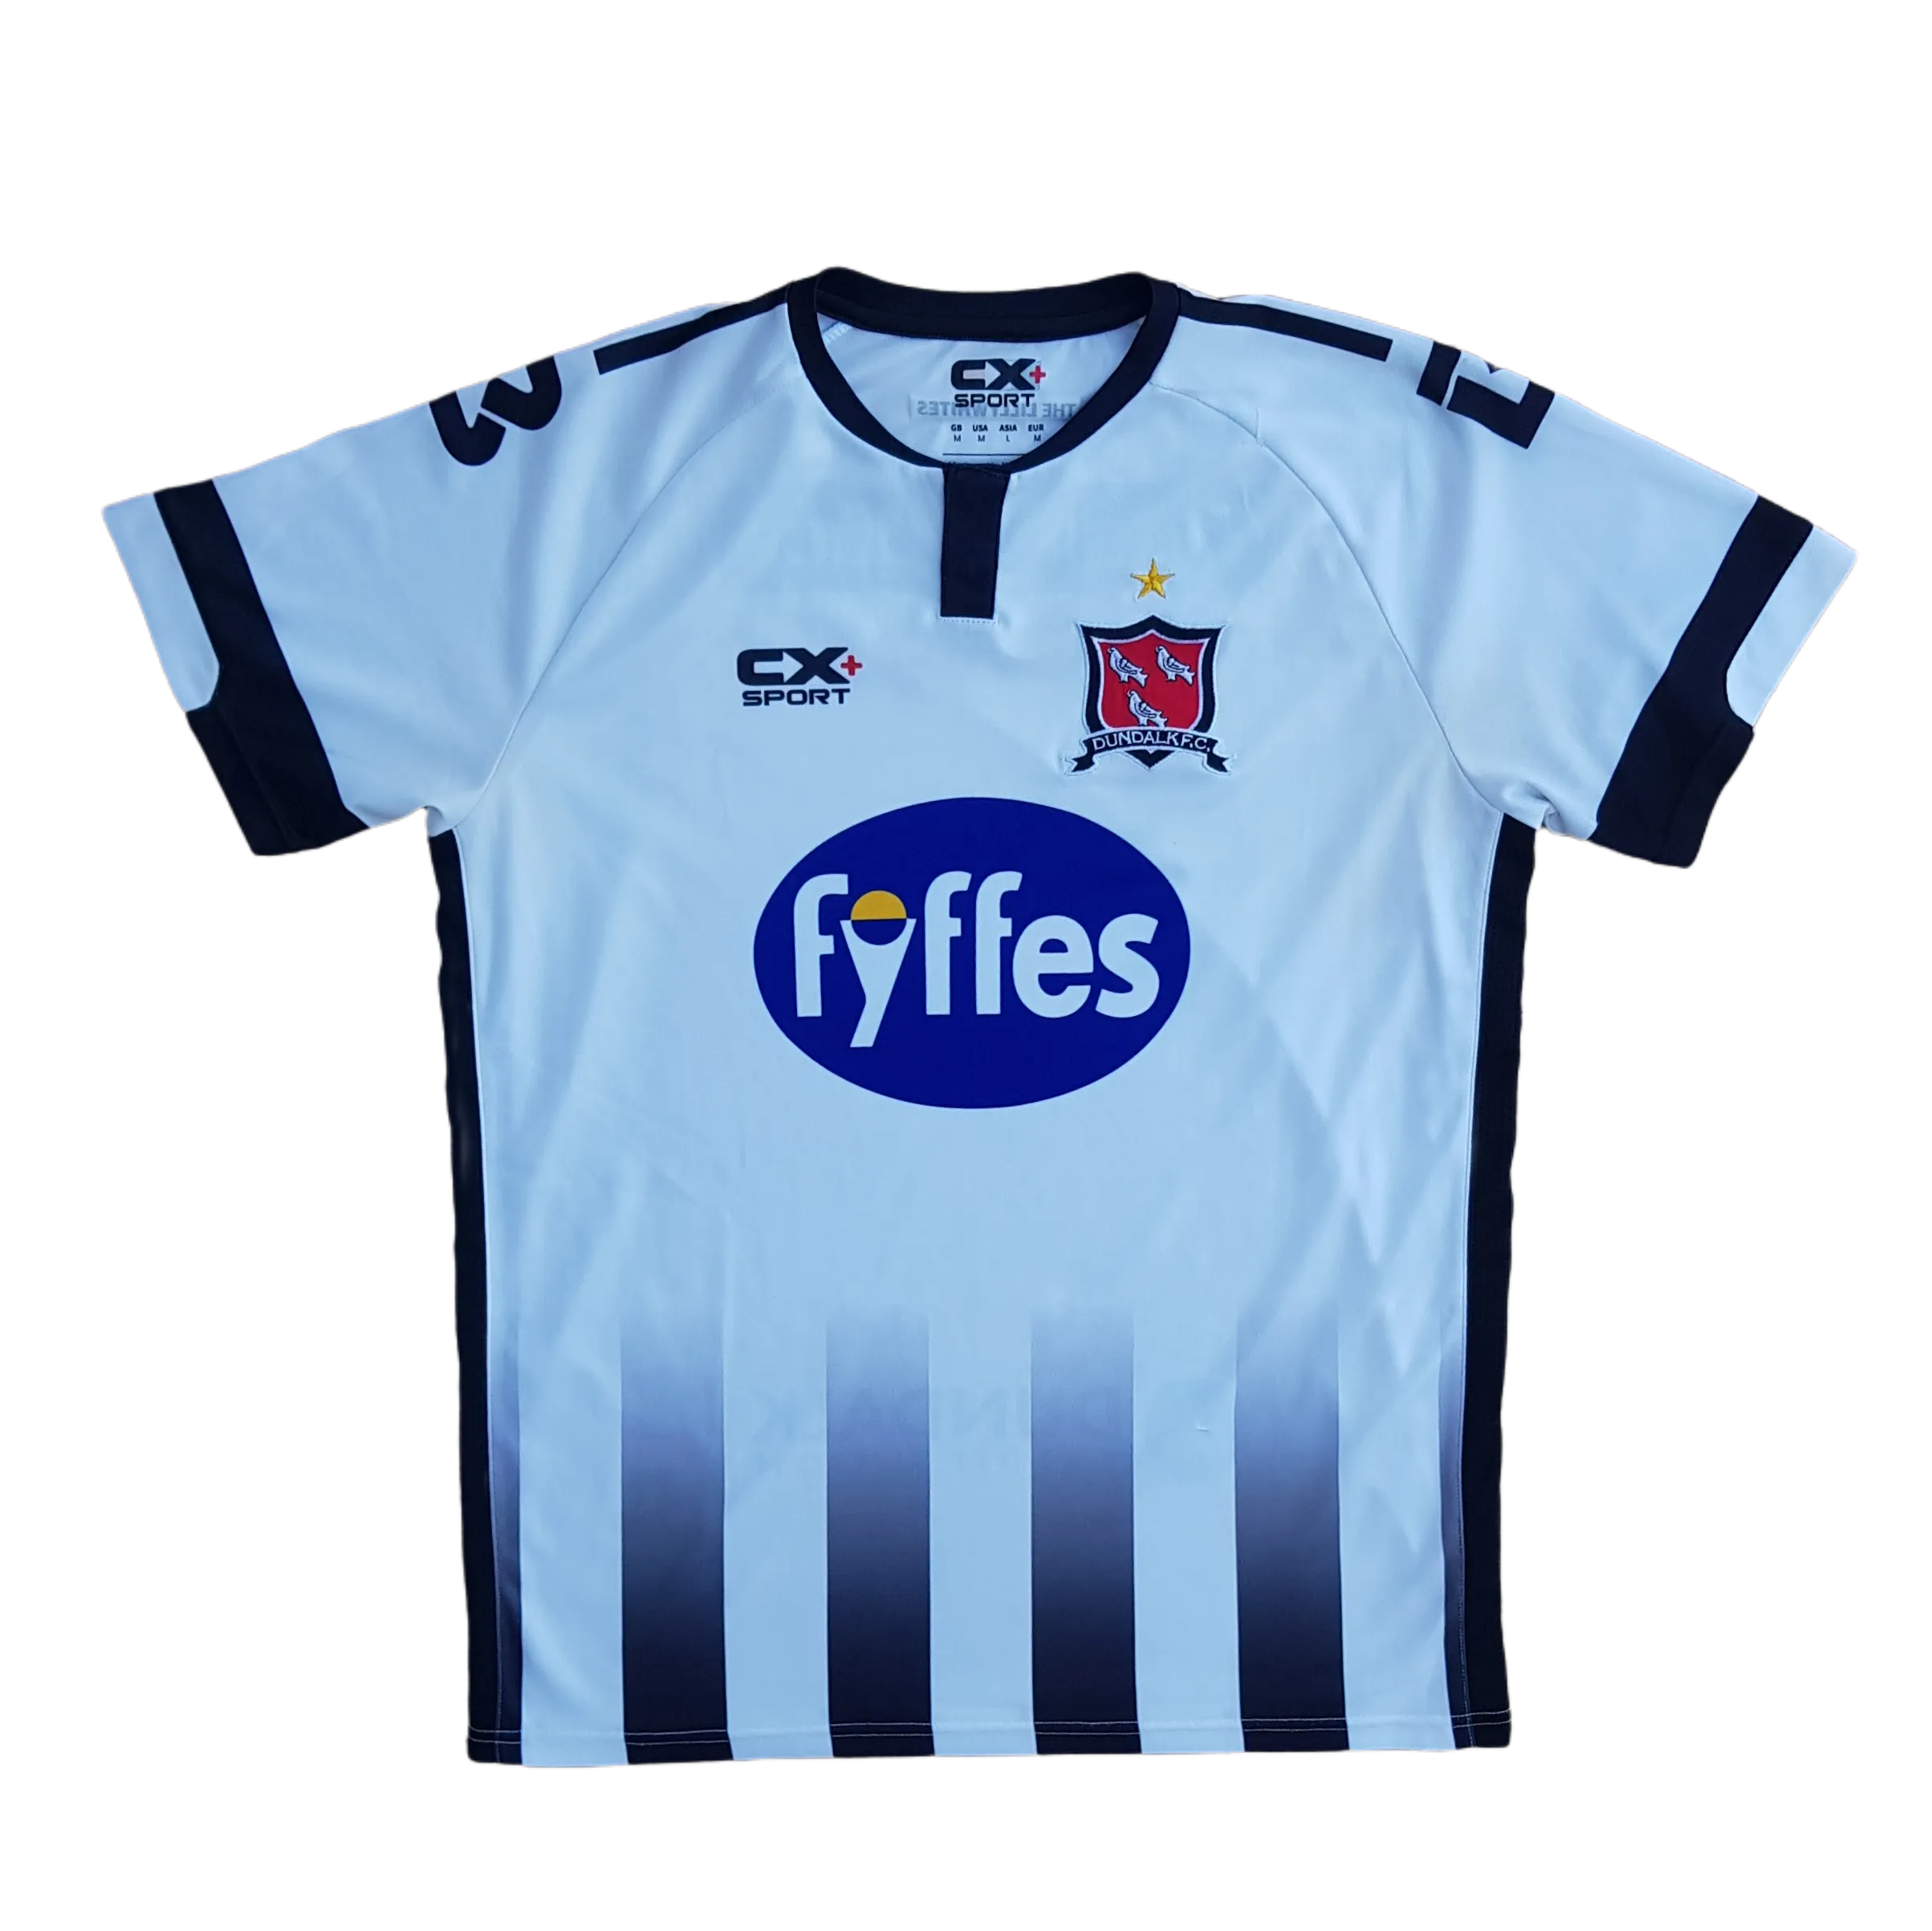 O'DONNELL JERSEY AUCTION - Dundalk Football Club